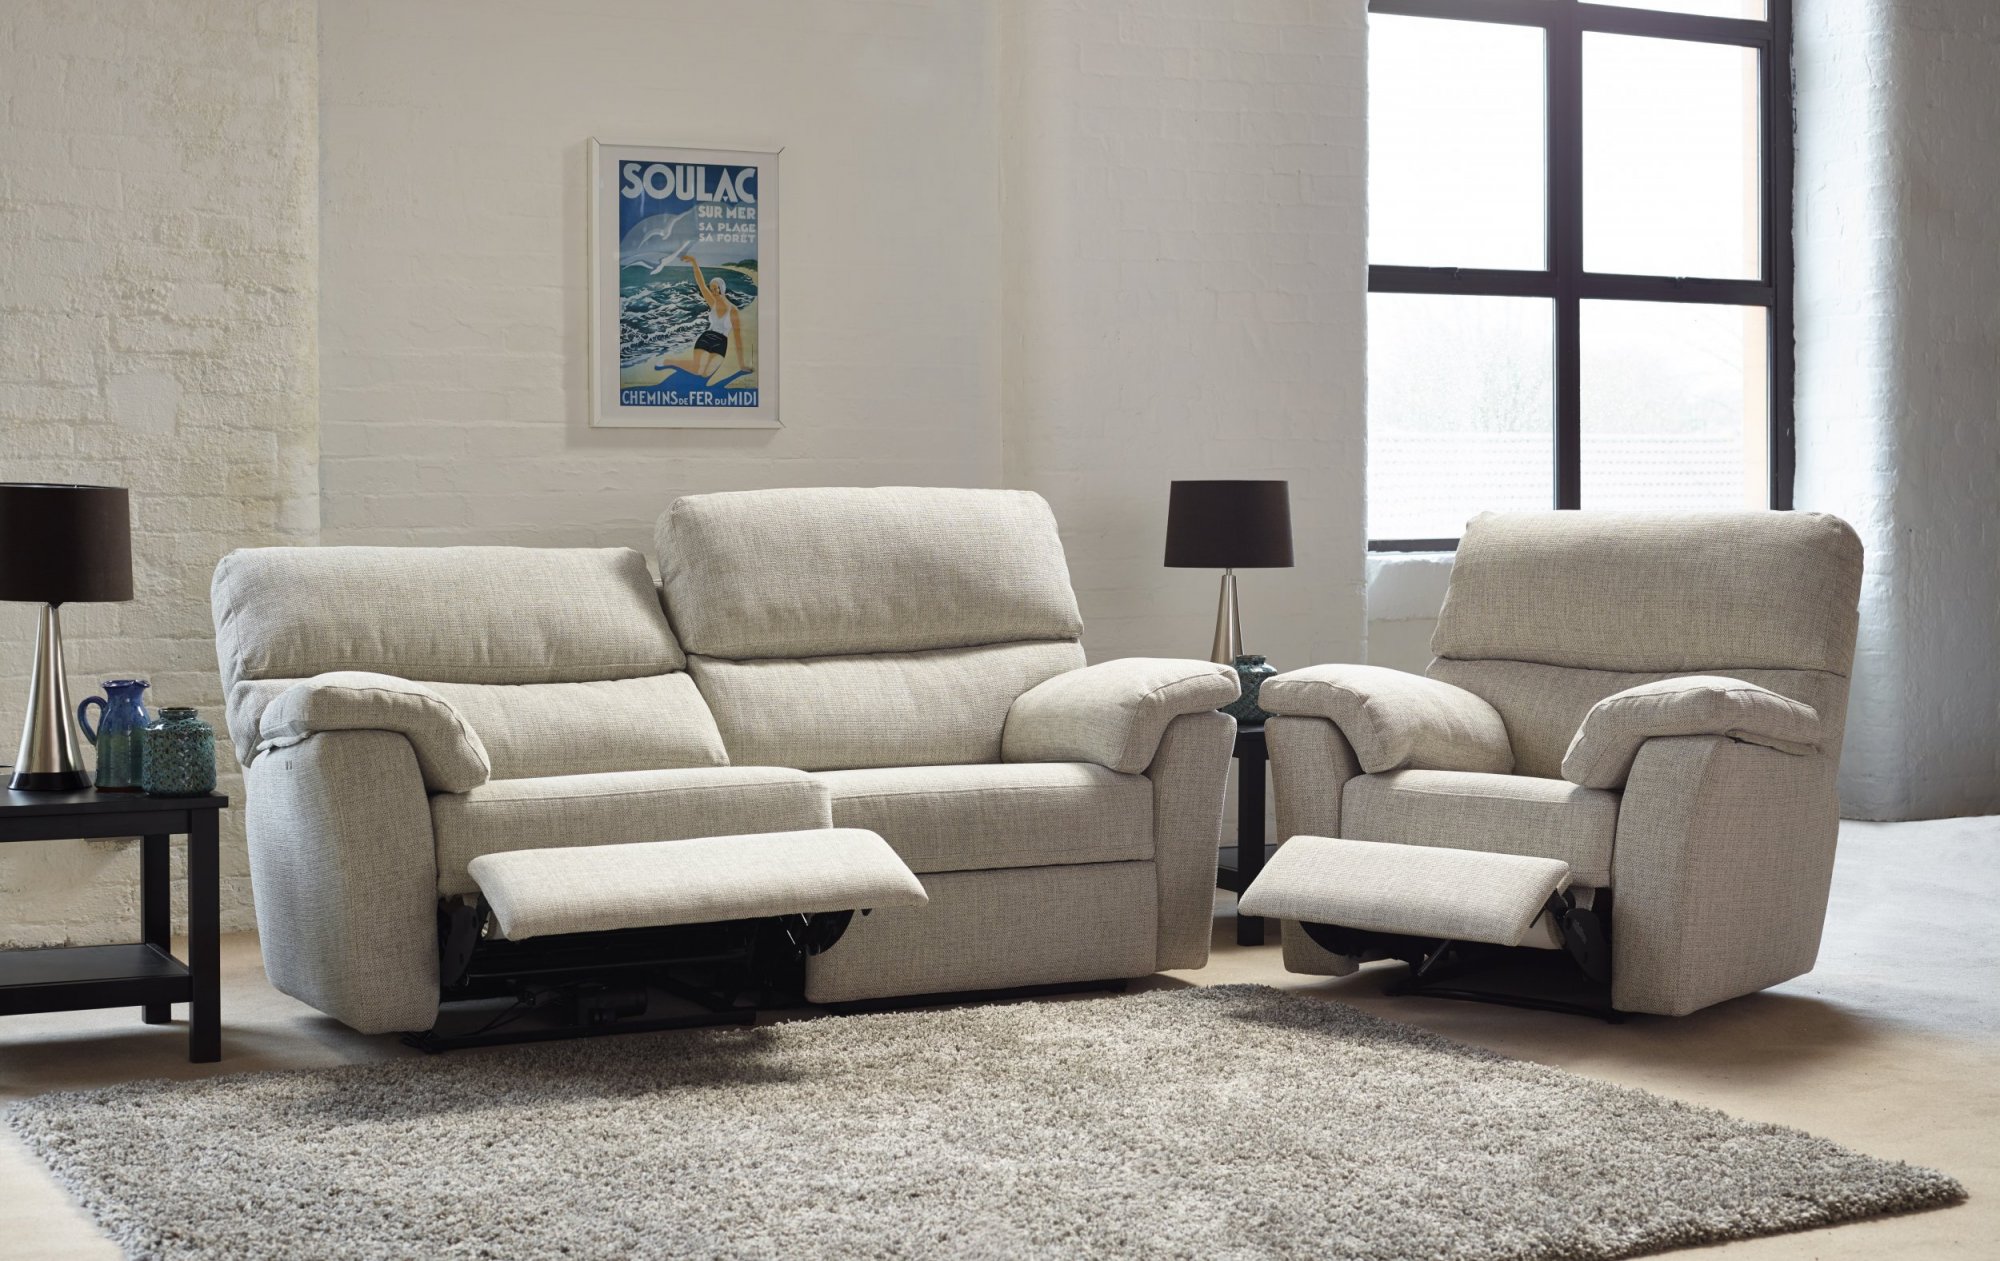 Ashwood Hamilton Recliner Chair | The UK's Lowest Prices! | Claytons ...